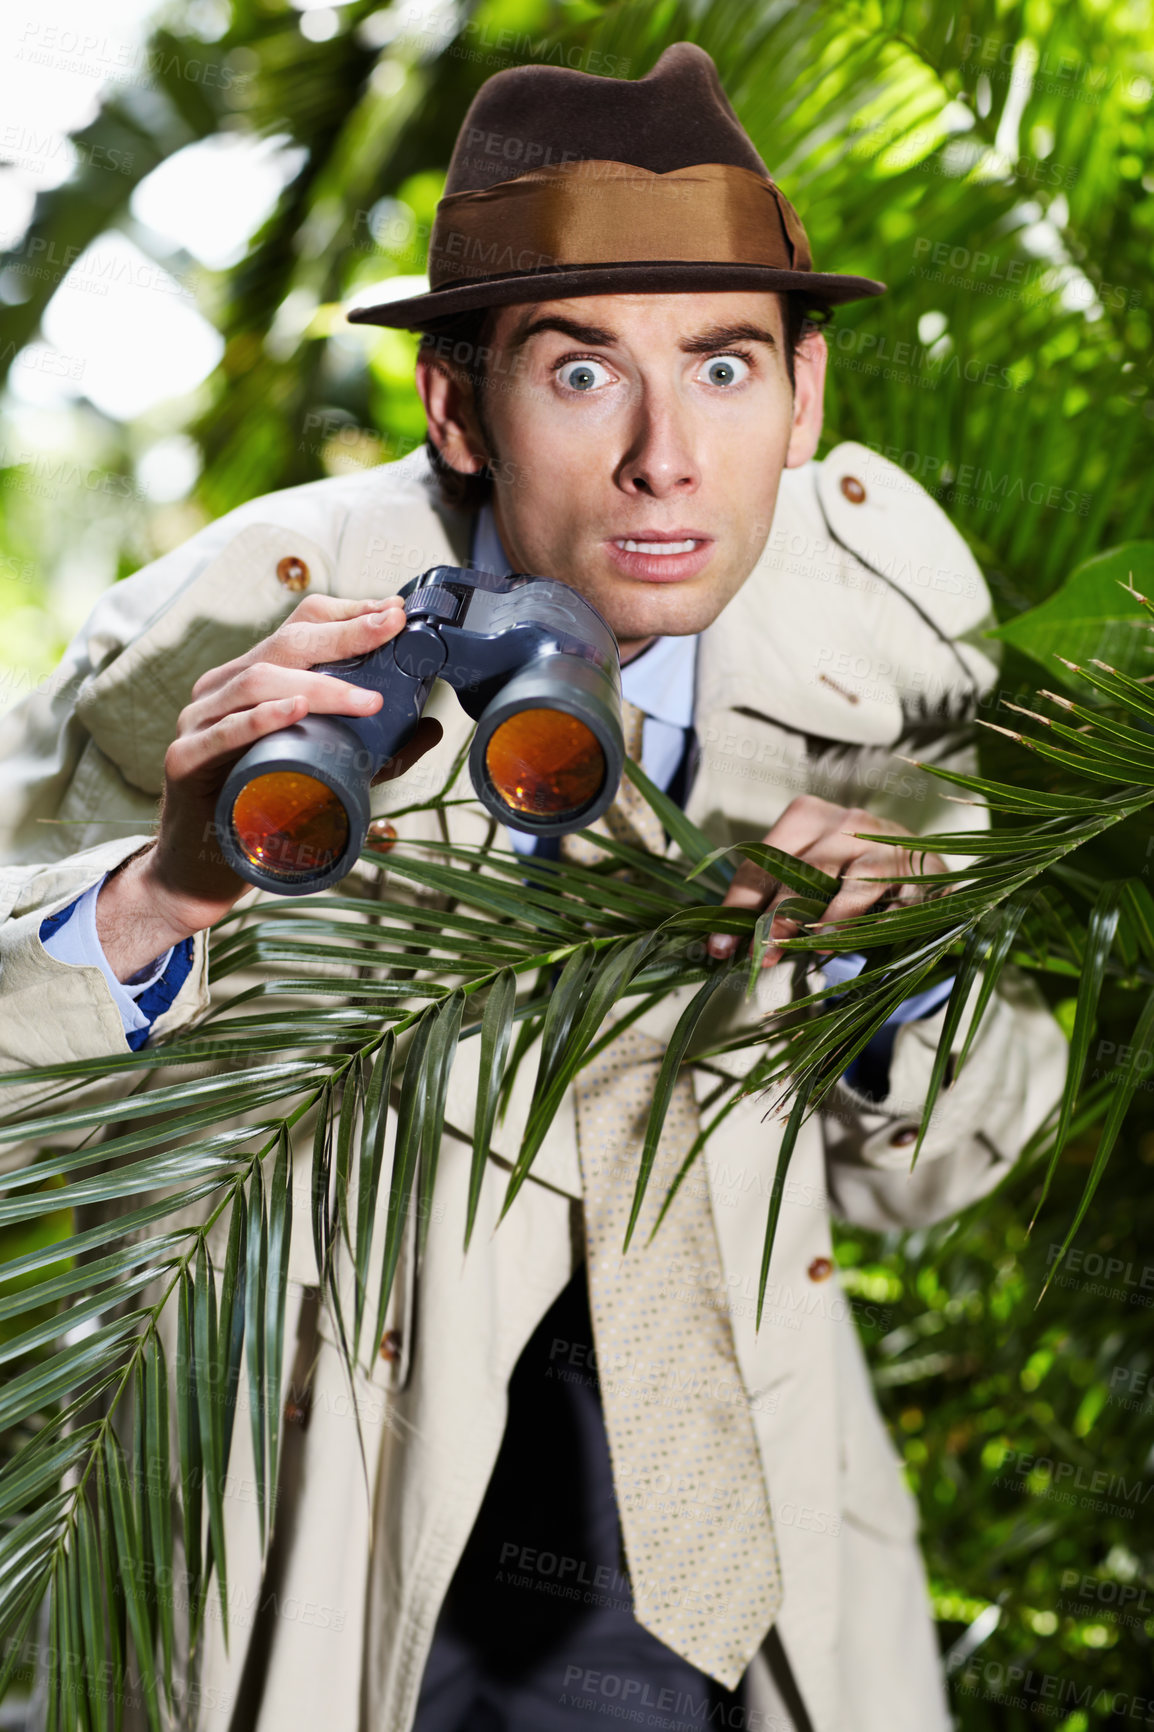 Buy stock photo Shocked private investigator using binoculars to spy on someone from the bushes